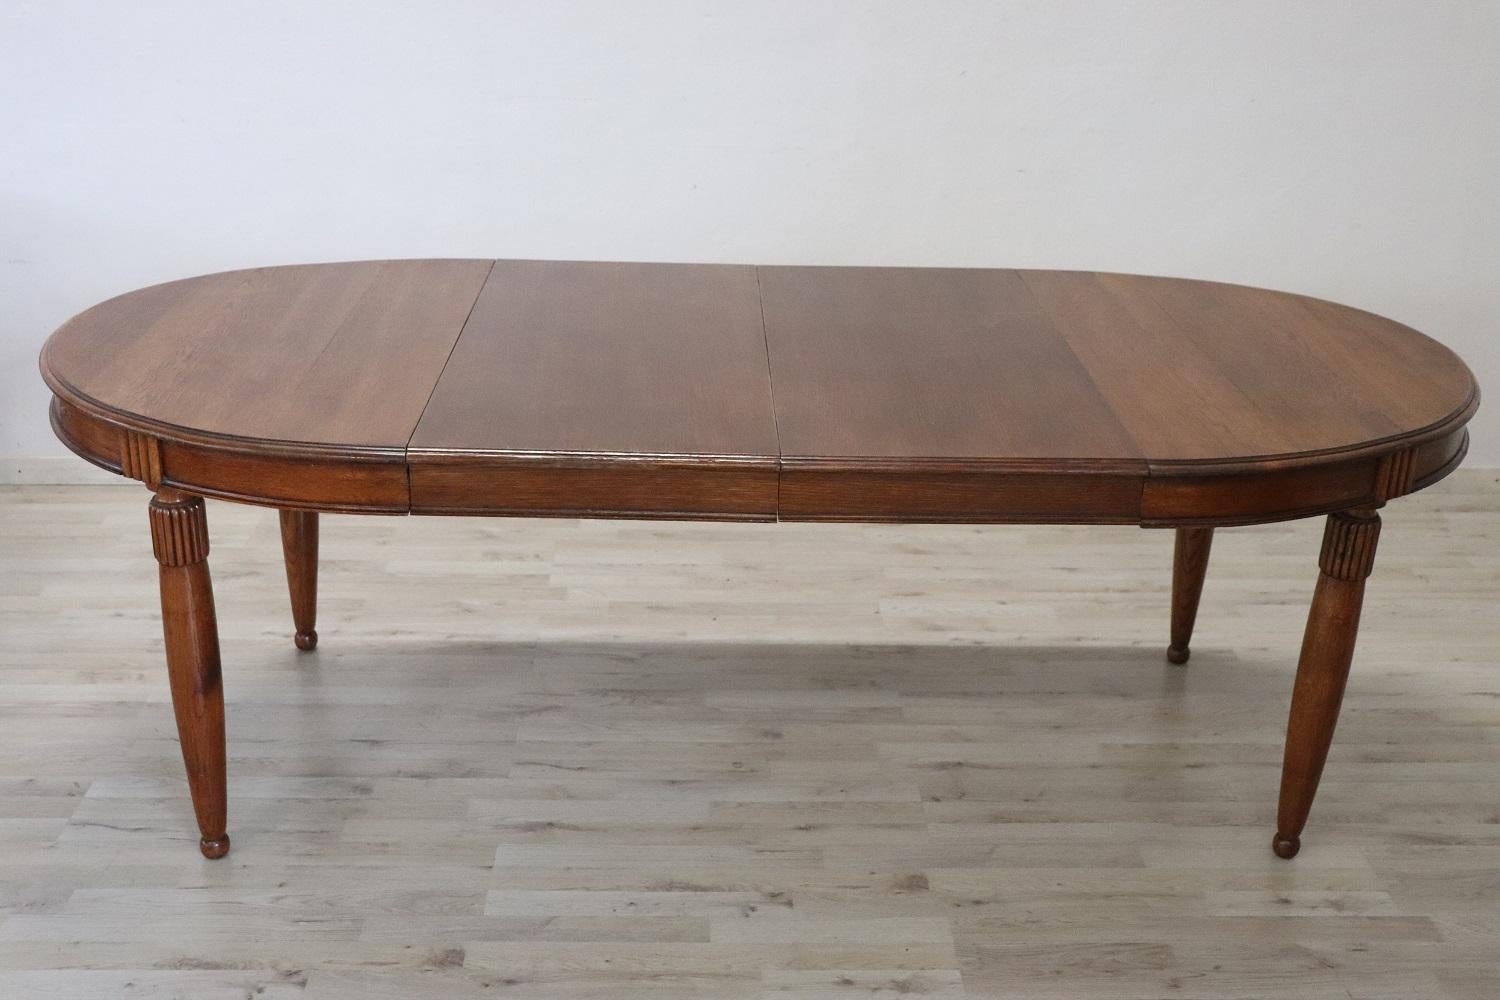 Early 20th Century Italian Oak Wood Oval Extendable Antique Dining Room Table 1